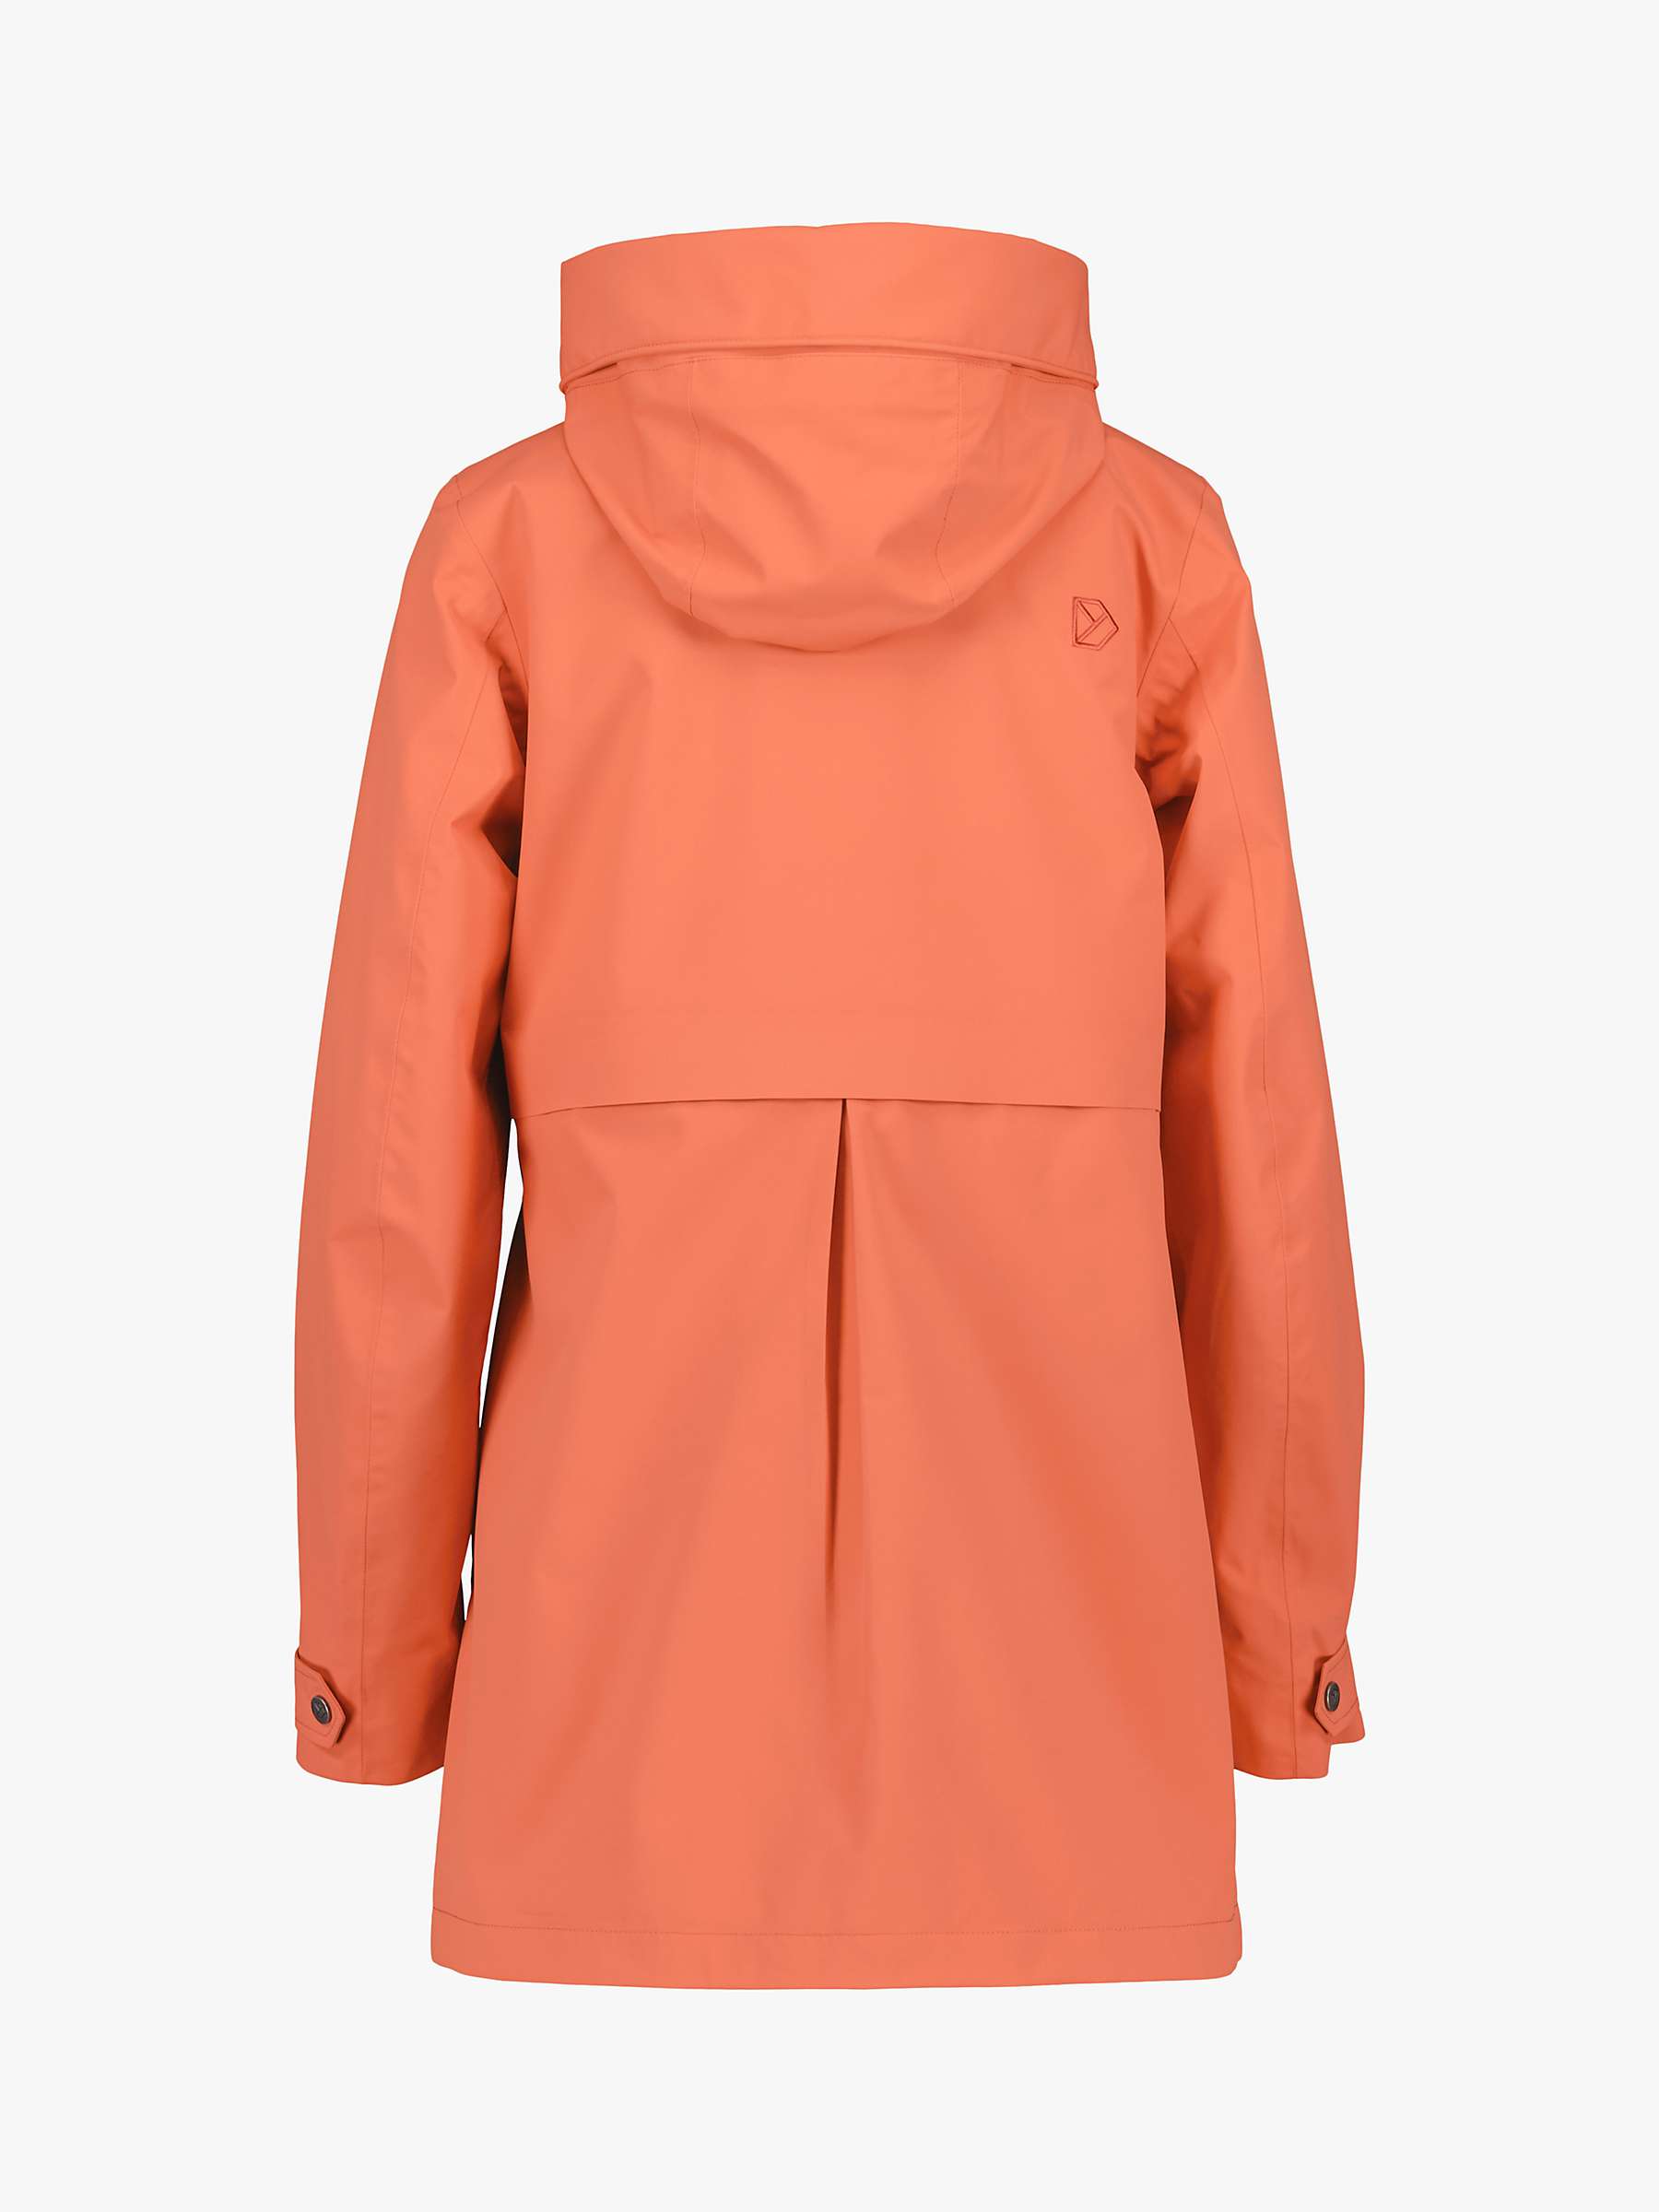 Buy Didriksons Edith Waterproof Parka, Brique Red Online at johnlewis.com